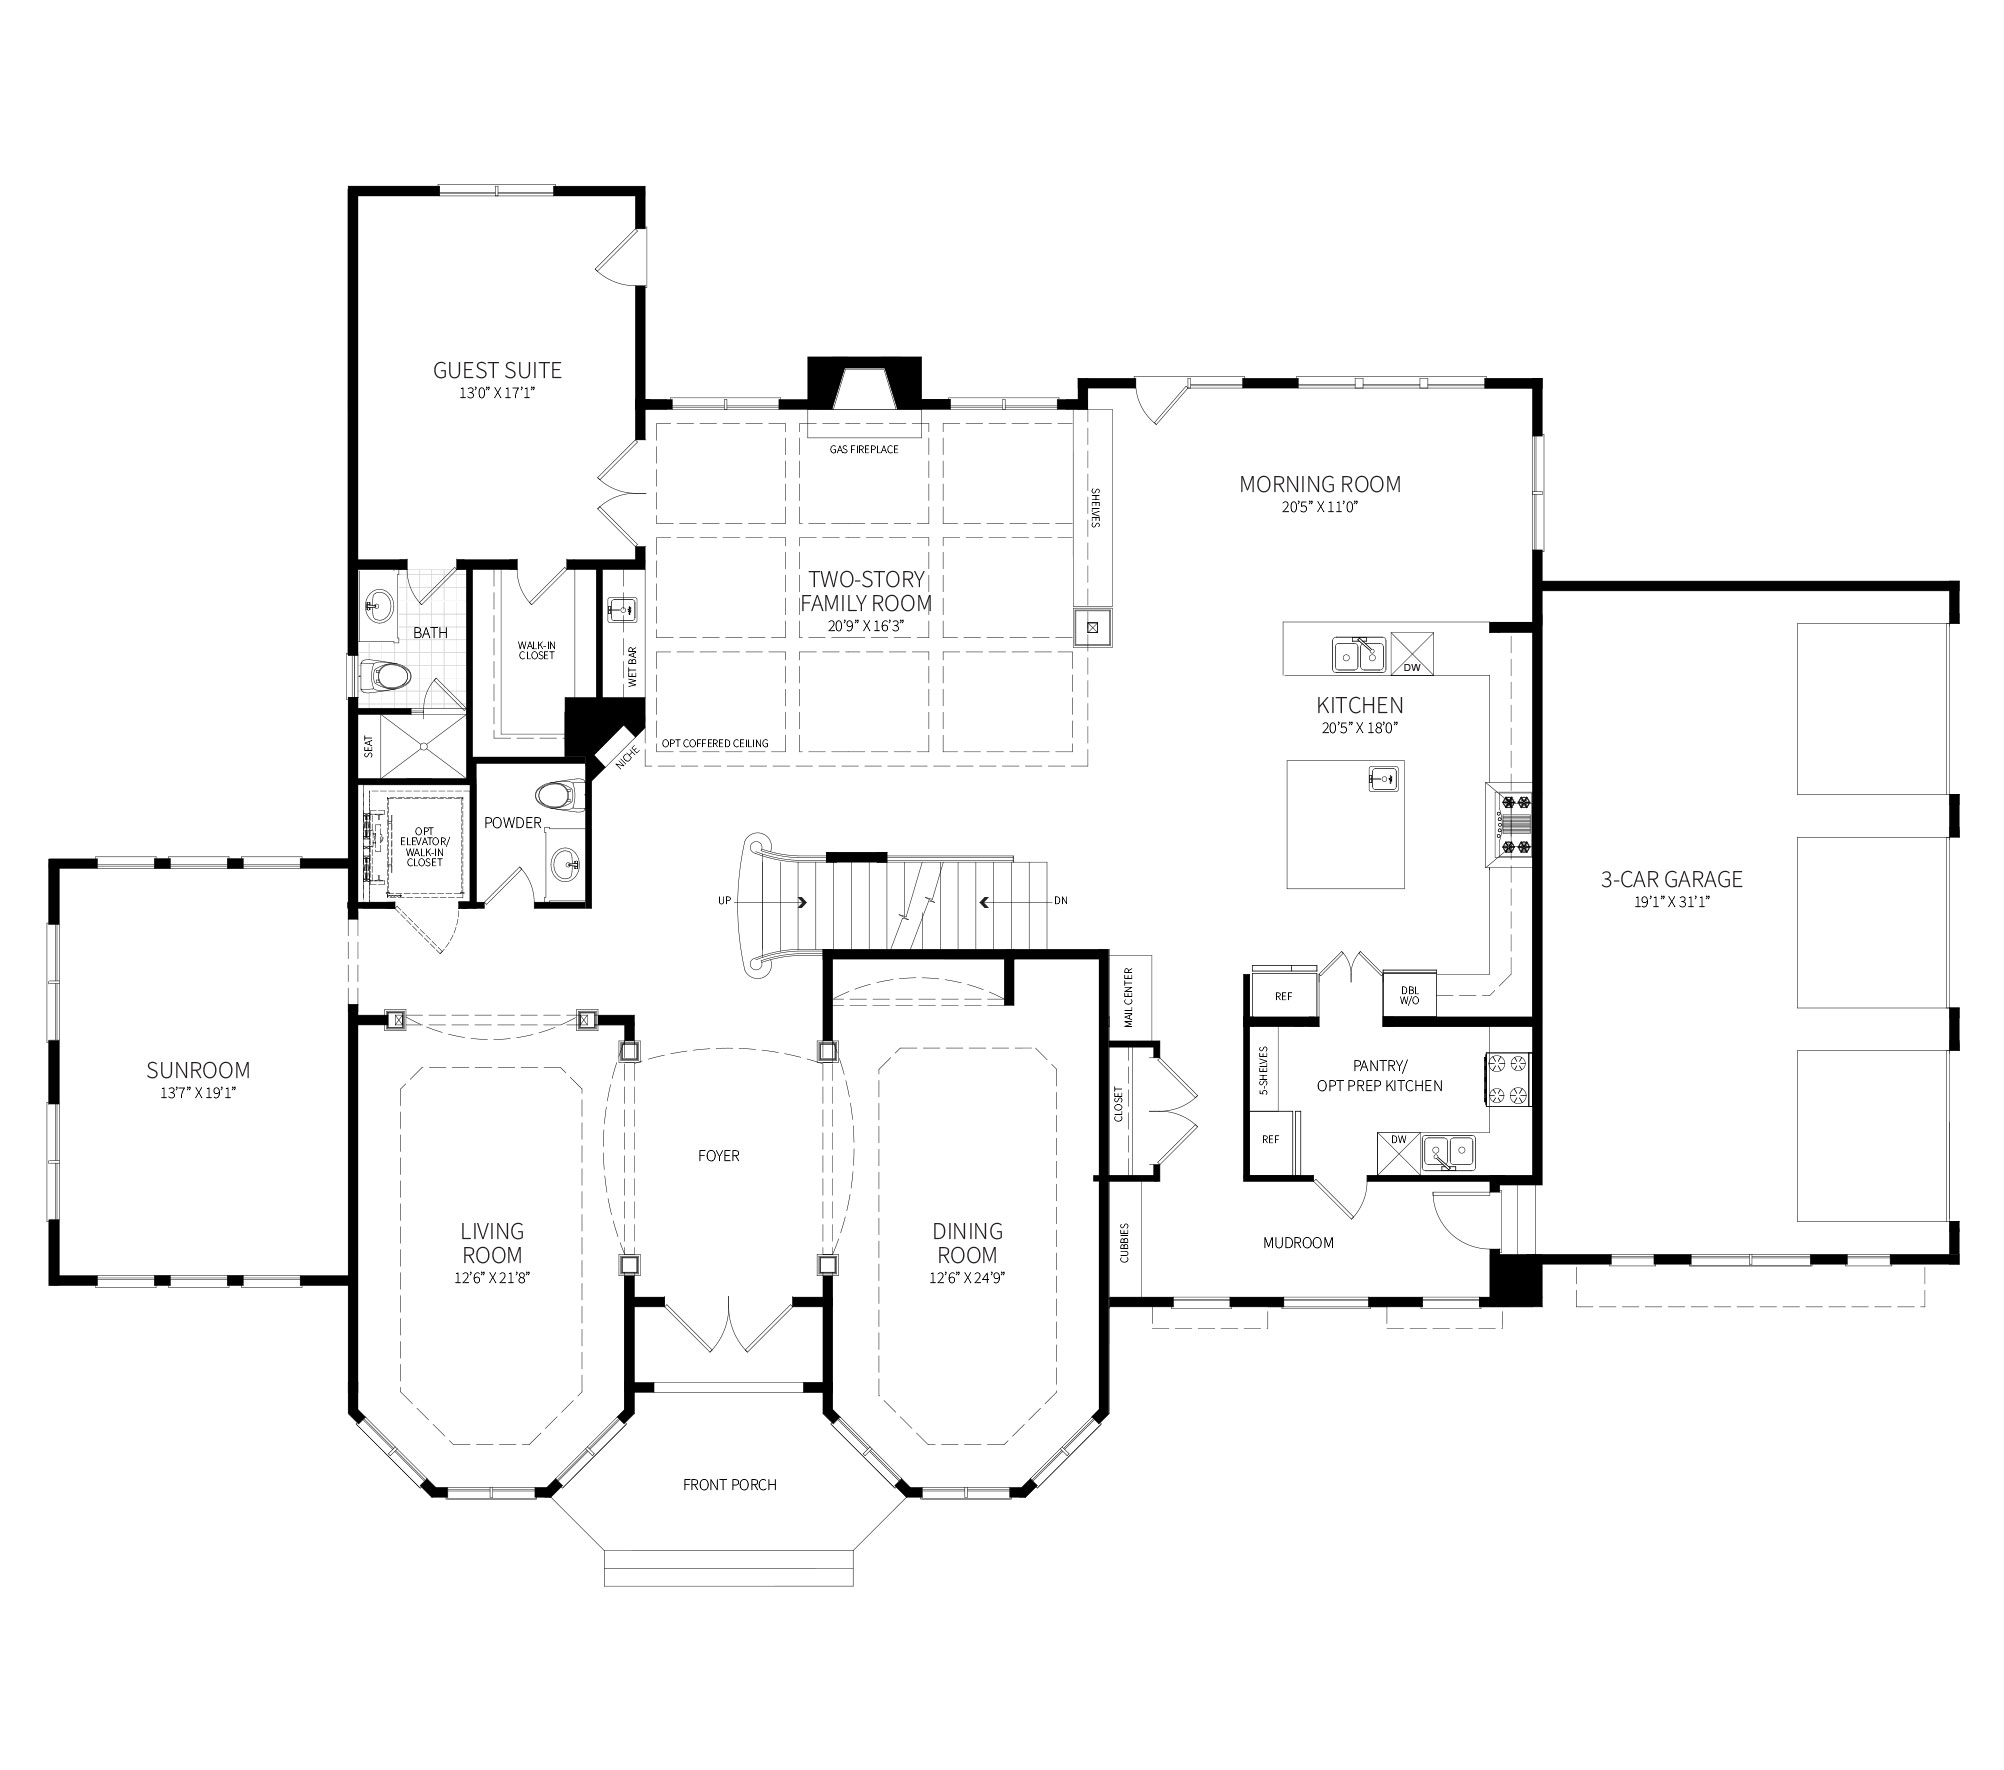 The first floor plan of the Horseshoe model, showing 3-car side load garage, guest suite with bath and opt prep kitchen.